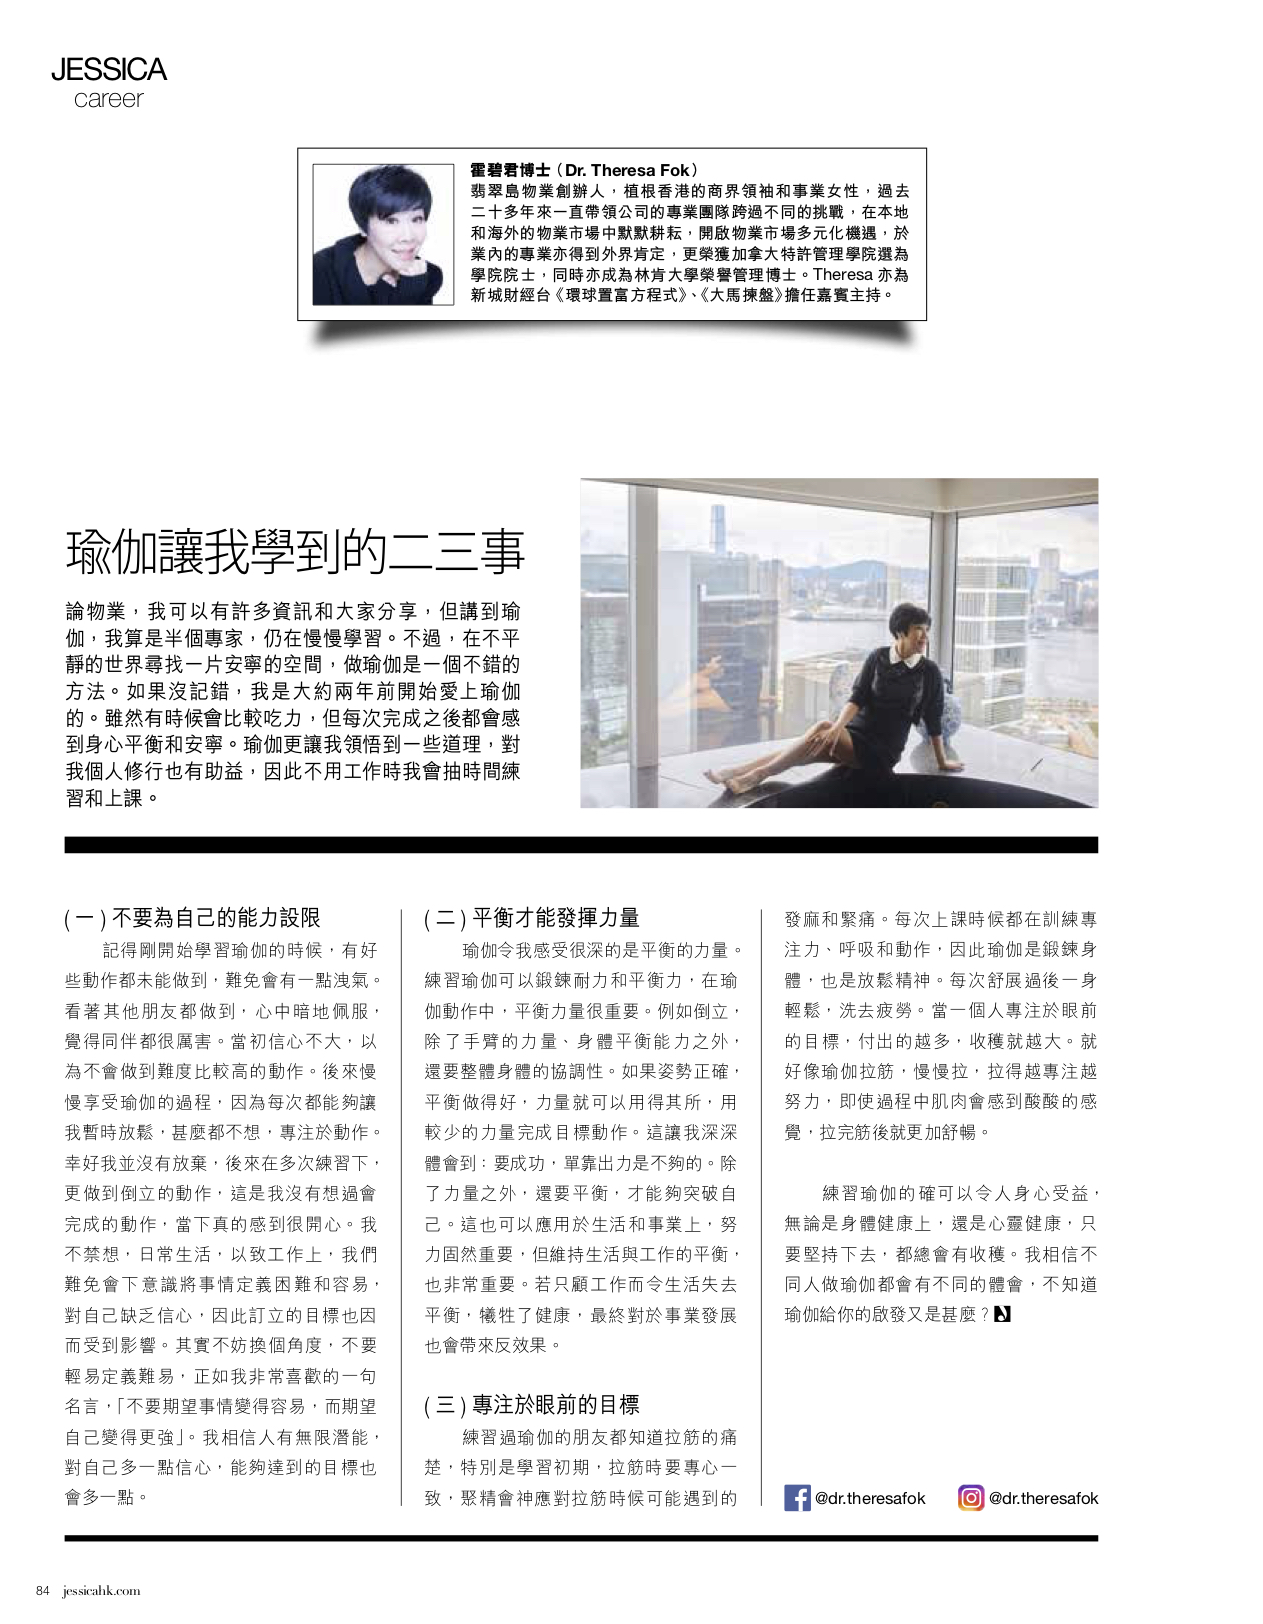 Dr. Theresa Fok’s Jessica Magazine – Lifestyle Monthly Column (August 2020)